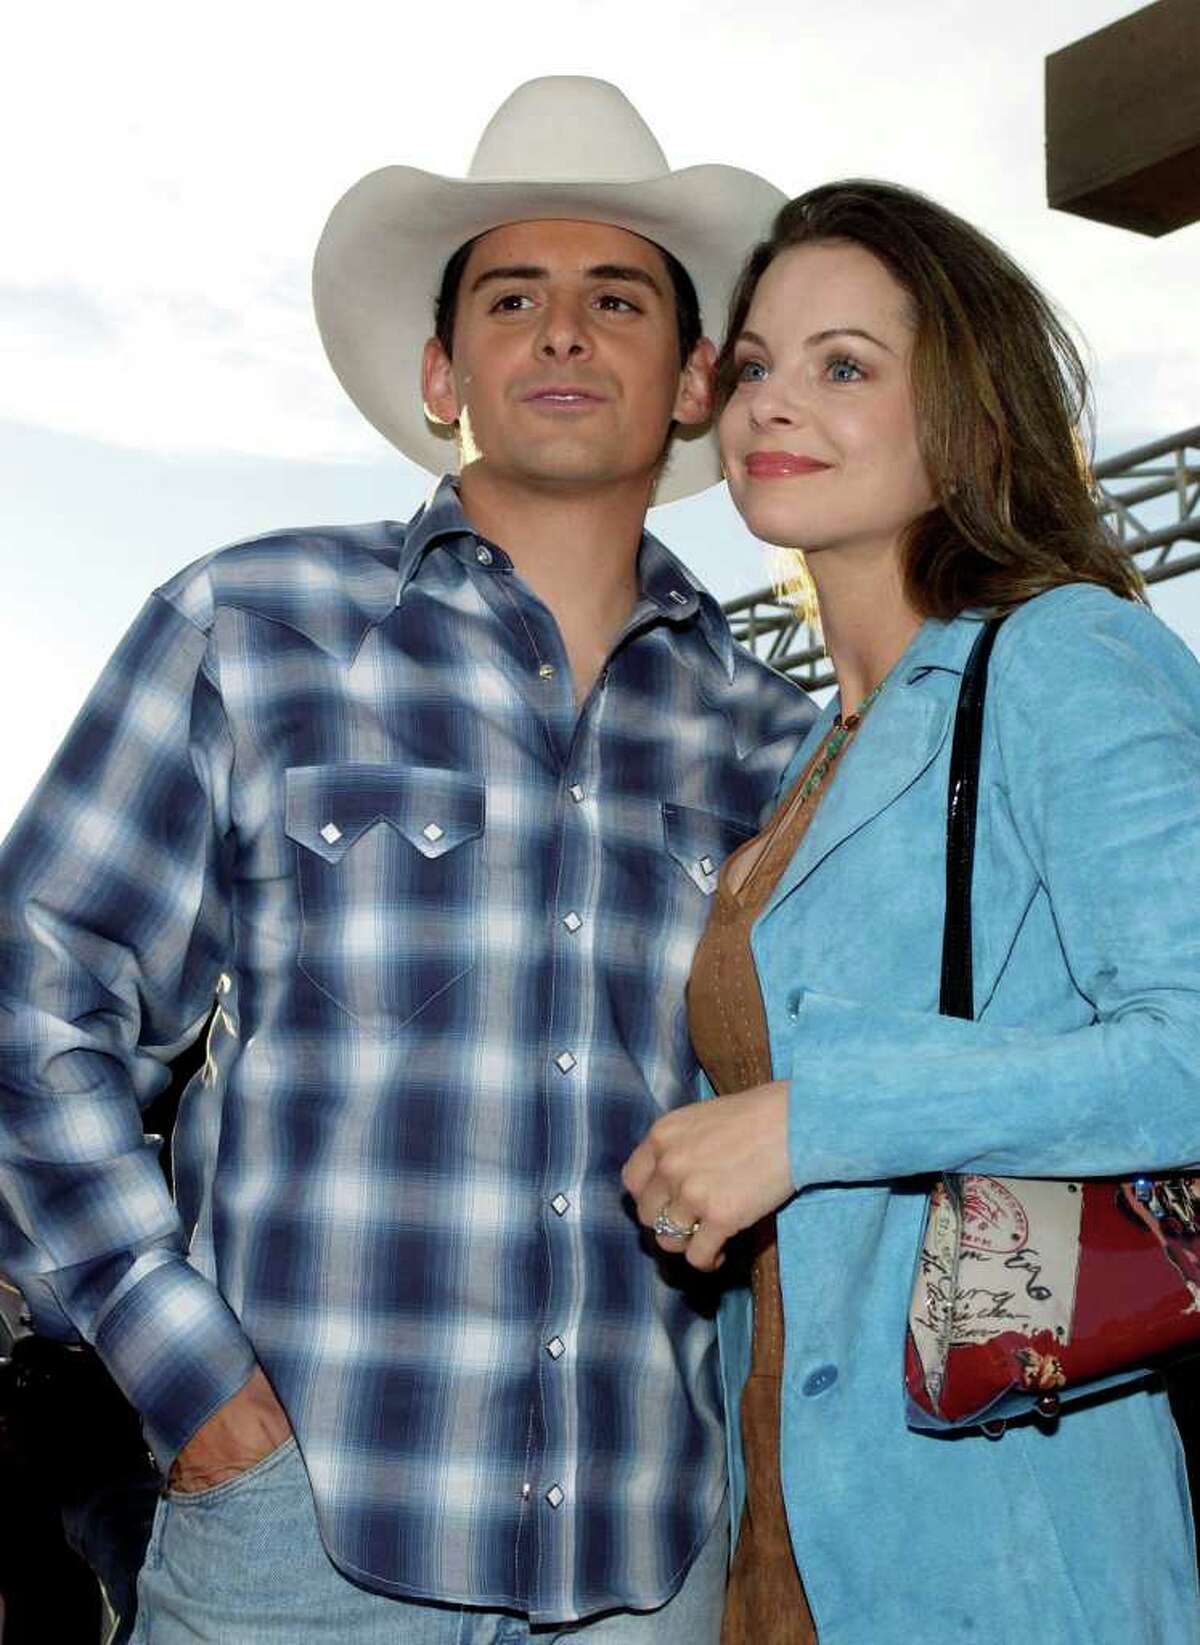 **FILE**Country music recording artist Brad Paisley and actress Kimberly Williams arrive at the premiere of "Open Range," in this file photo Aug. 11, 2003, in the Hollywood section of Los Angeles. The couple are the parents of a baby boy. The couple's first child was born at 5 a.m. CST Thursday Feb. 22, 2007 in a Nashville-area hospital, according to a statement from the country star's publicist.